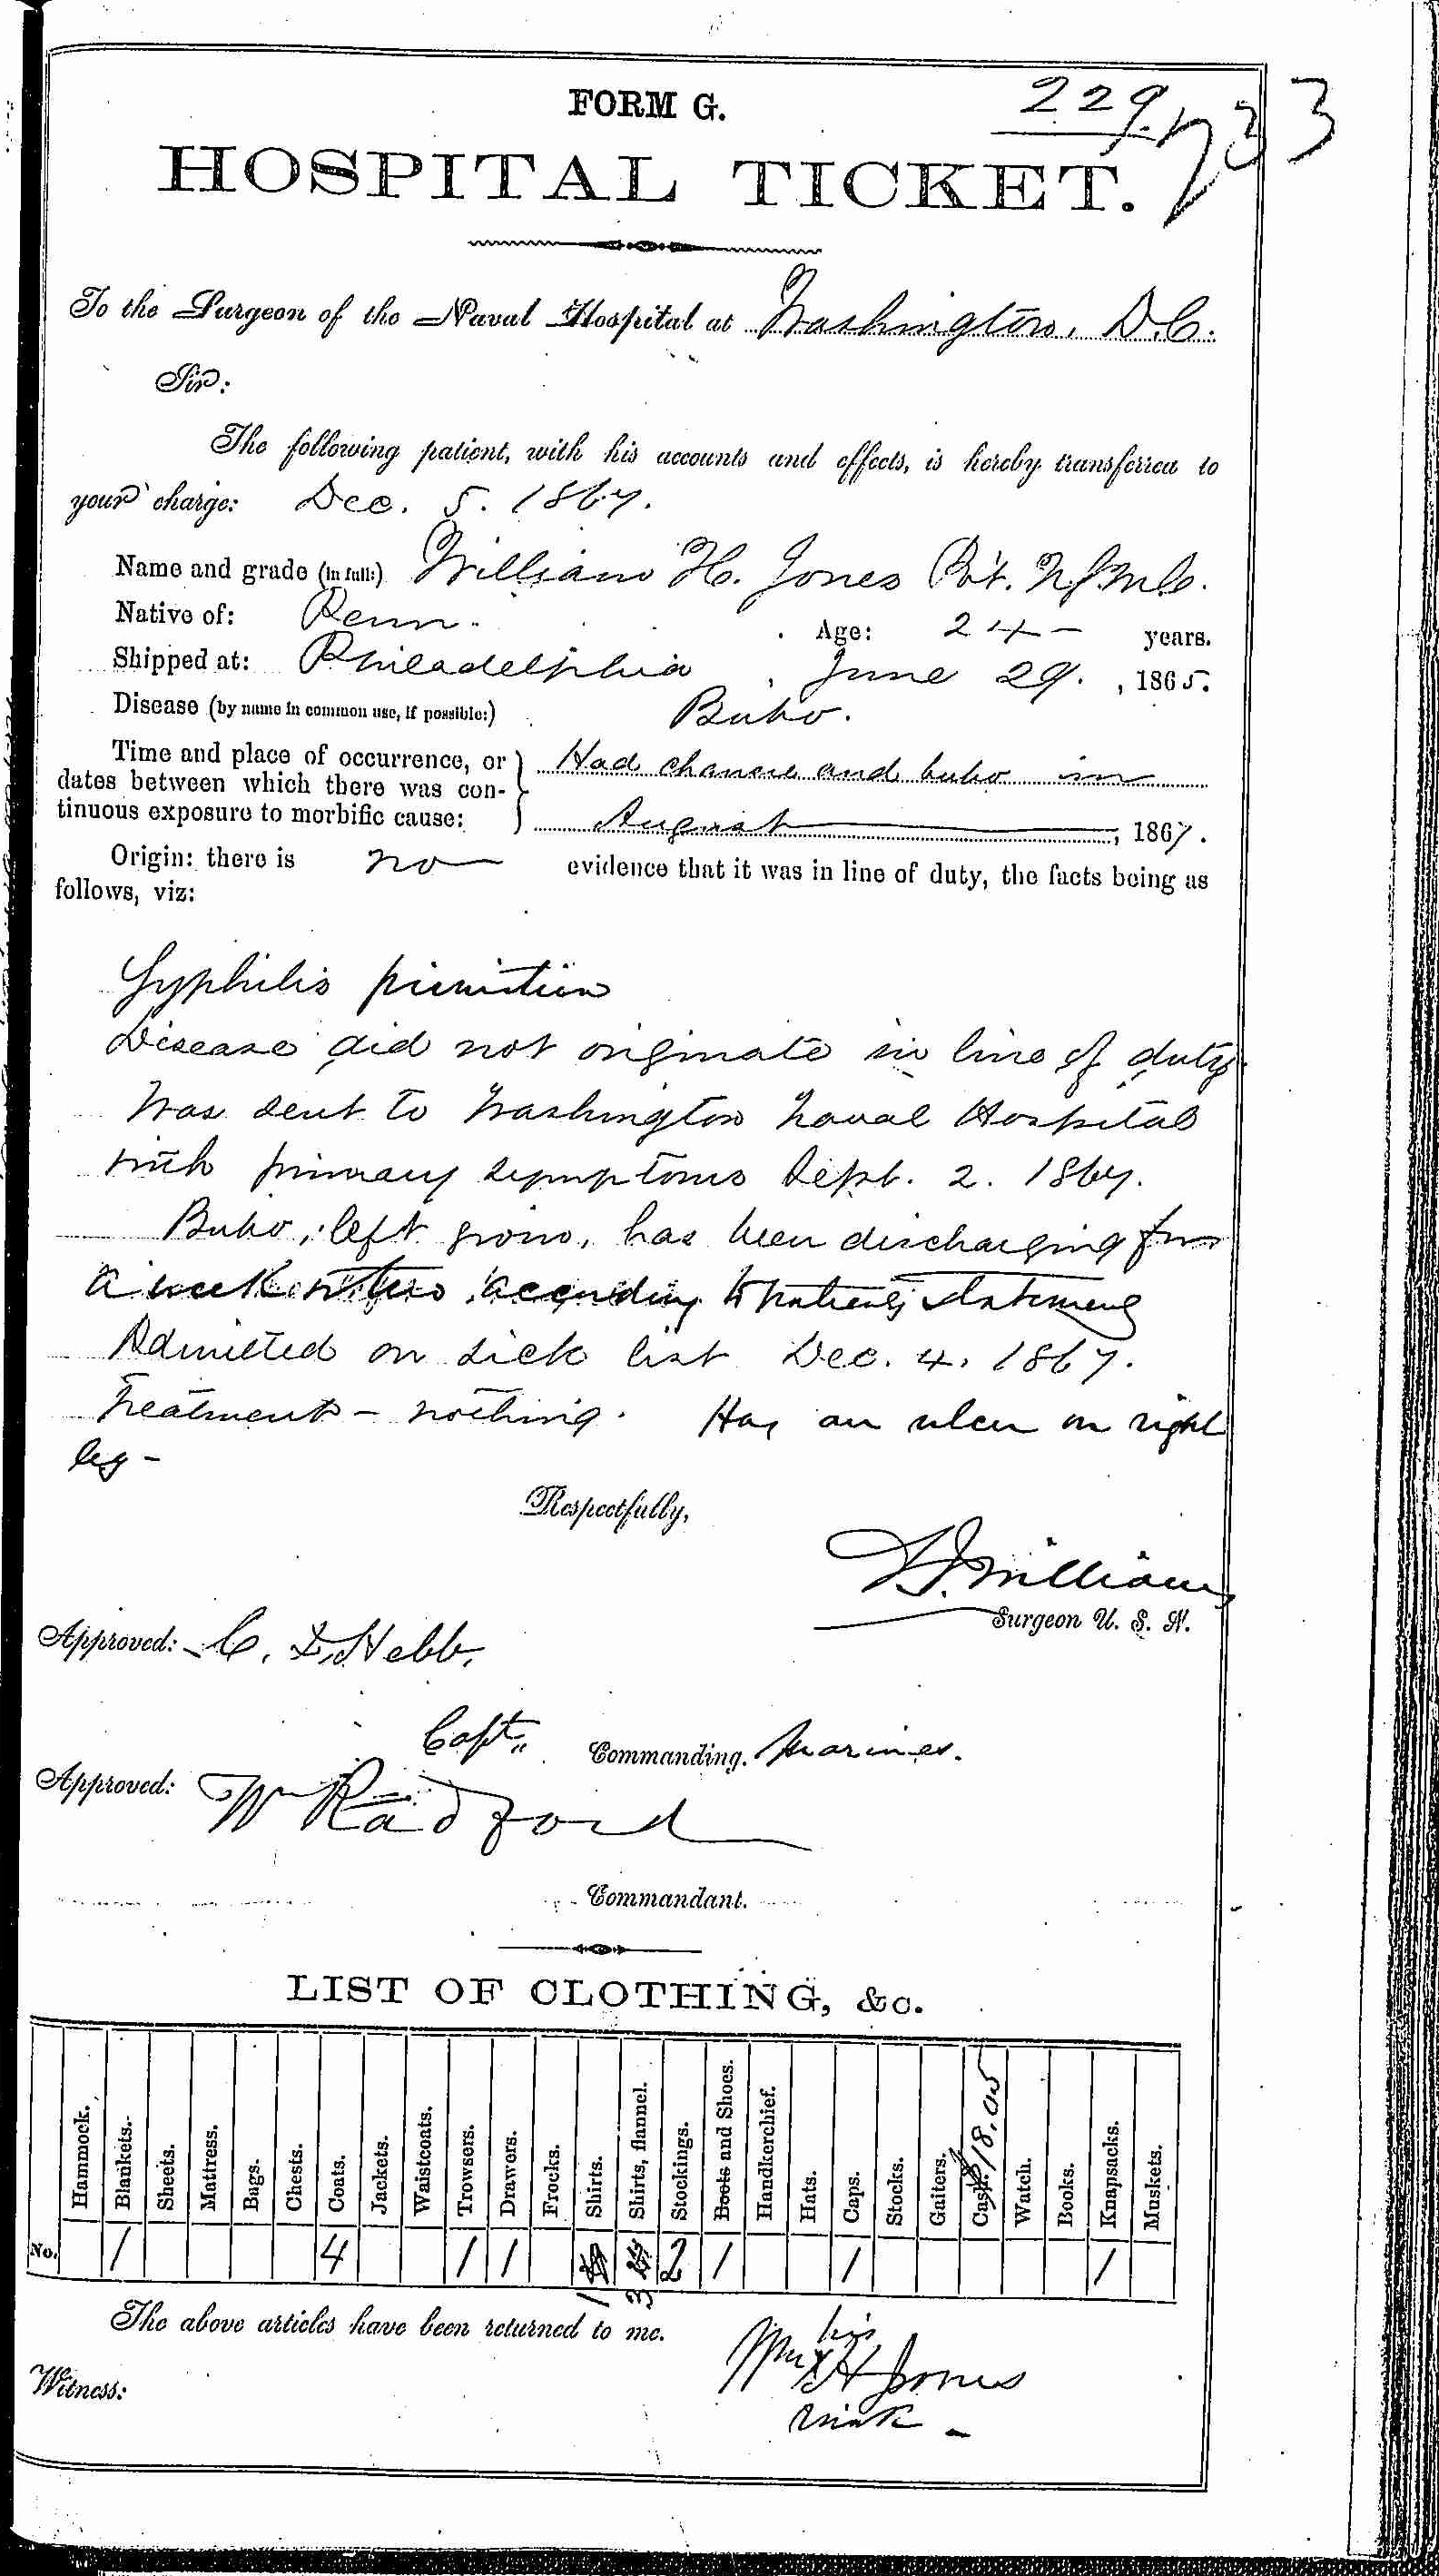 Entry for William H. Jones (page 1 of 2) in the log Hospital Tickets and Case Papers - Naval Hospital - Washington, D.C. - 1866-68